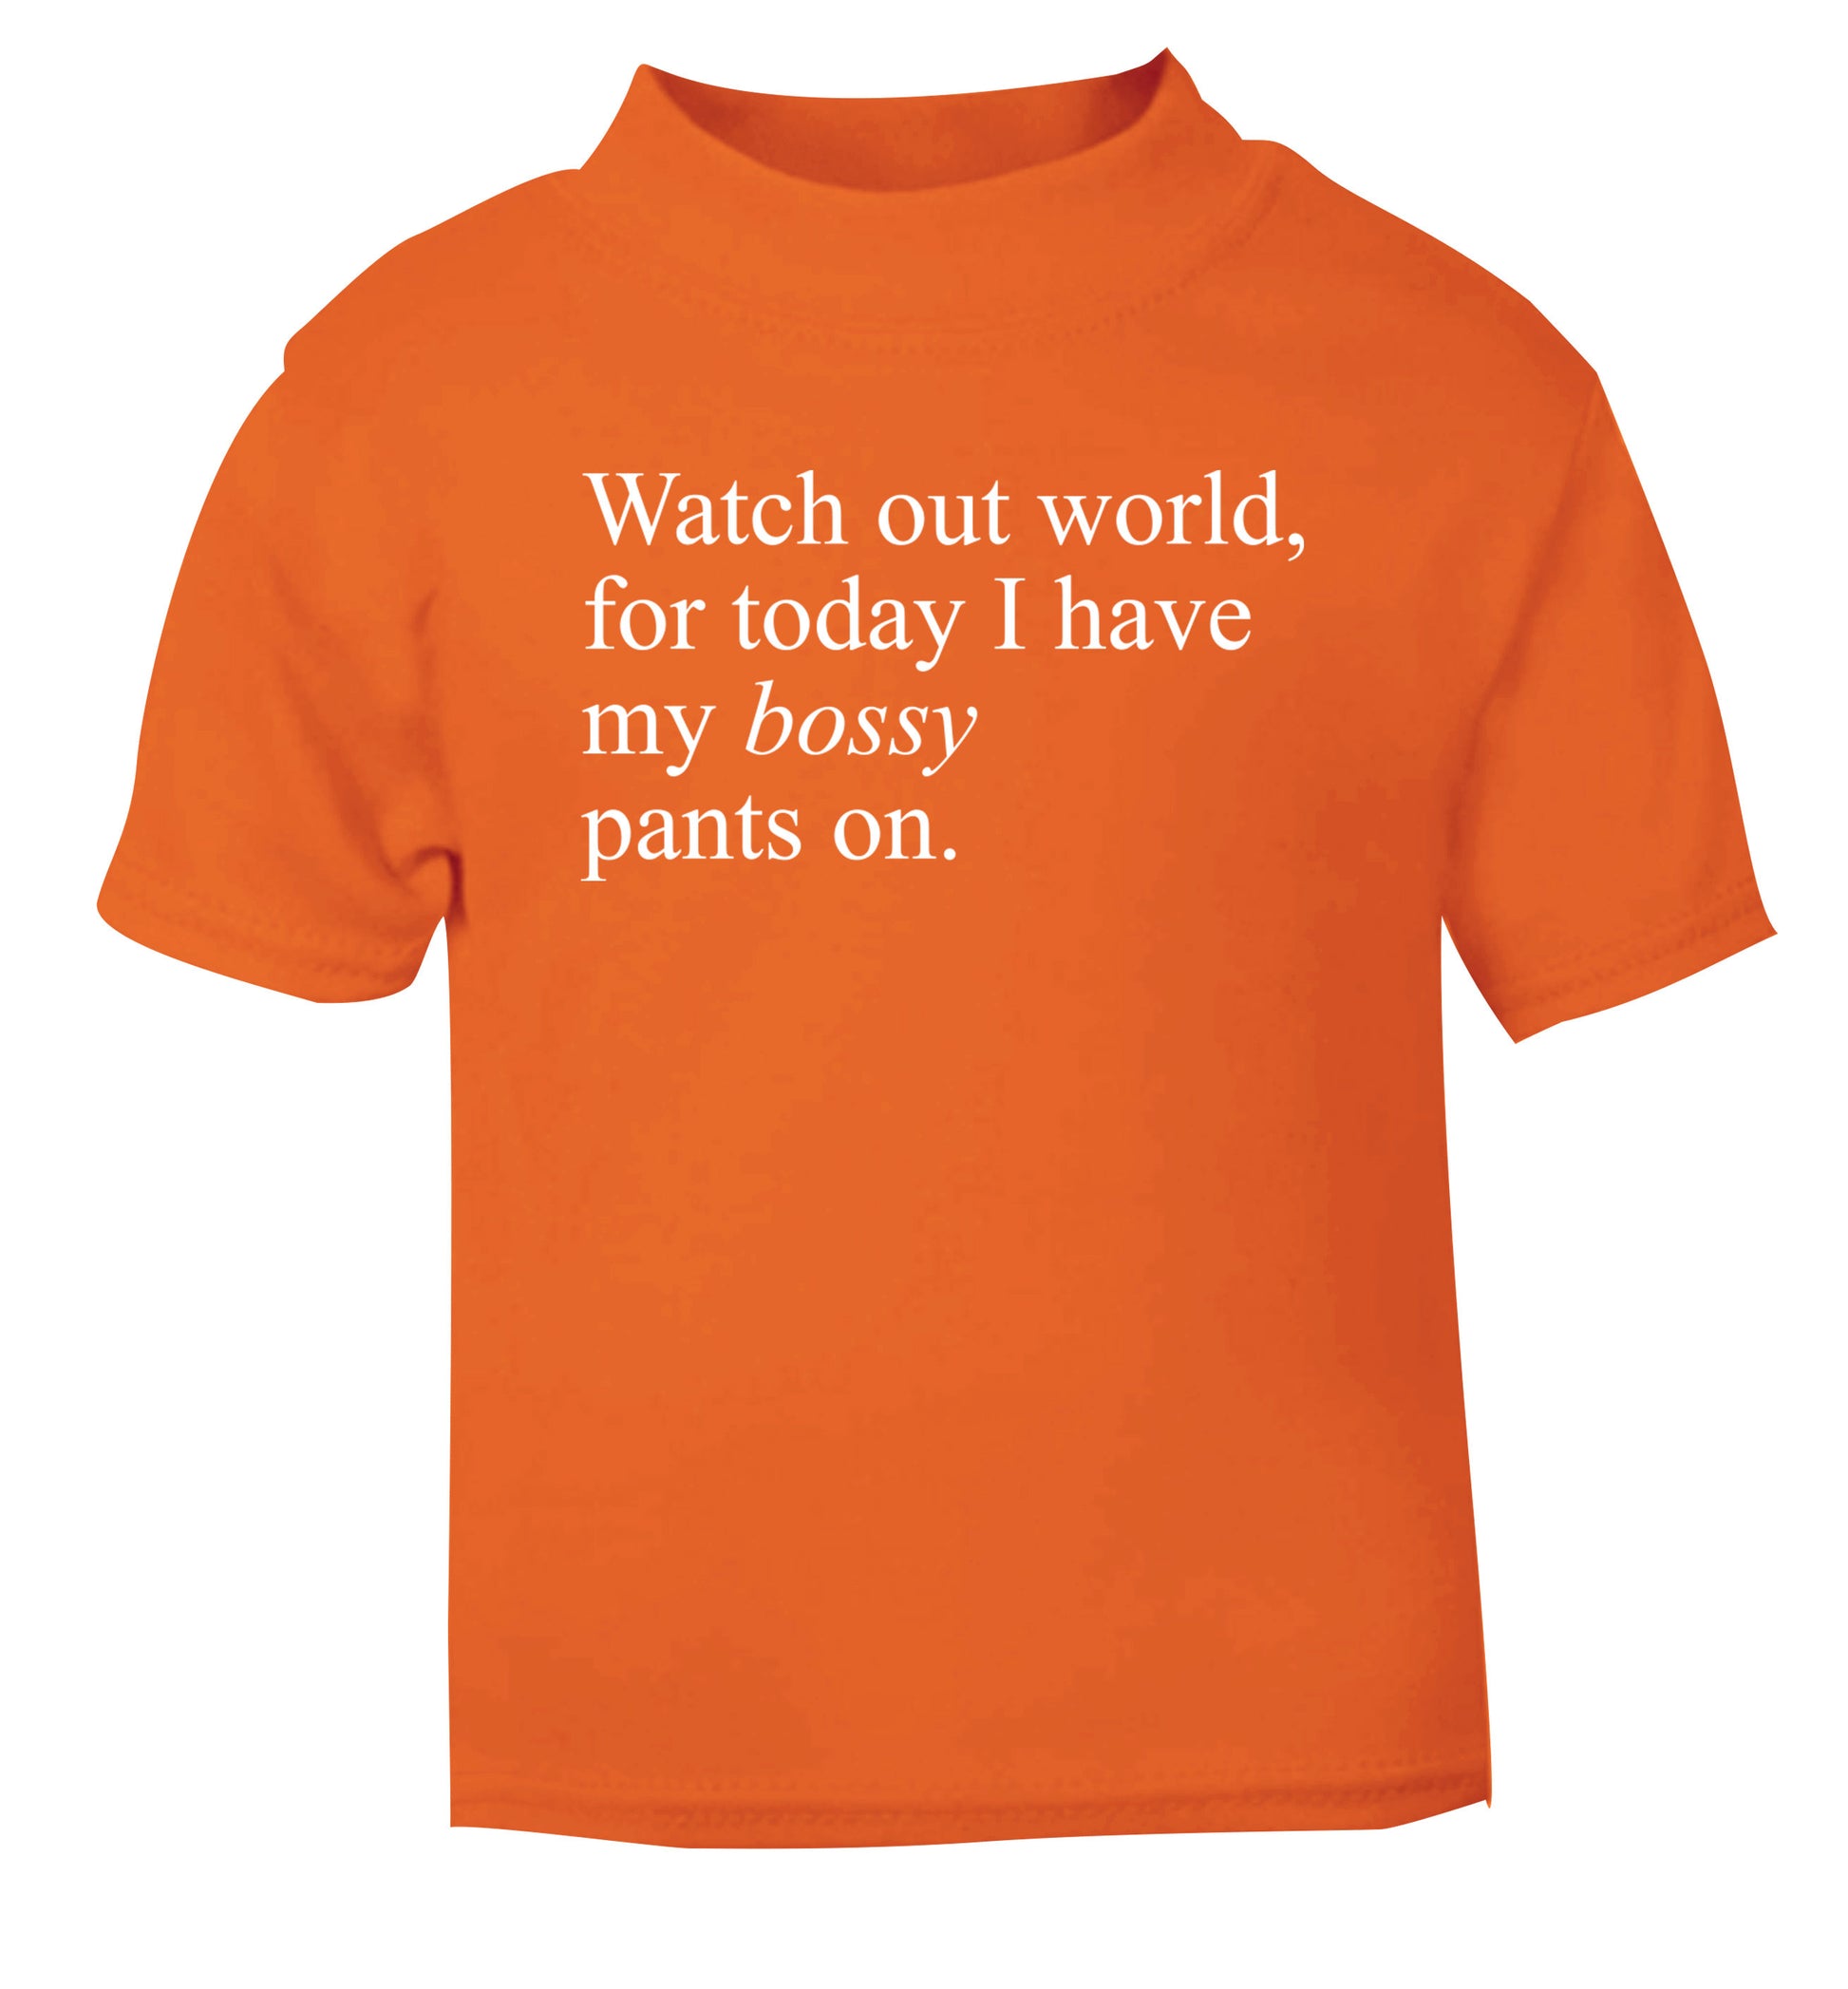 Watch out world, for today I have my bossy pants on orange Baby Toddler Tshirt 2 Years